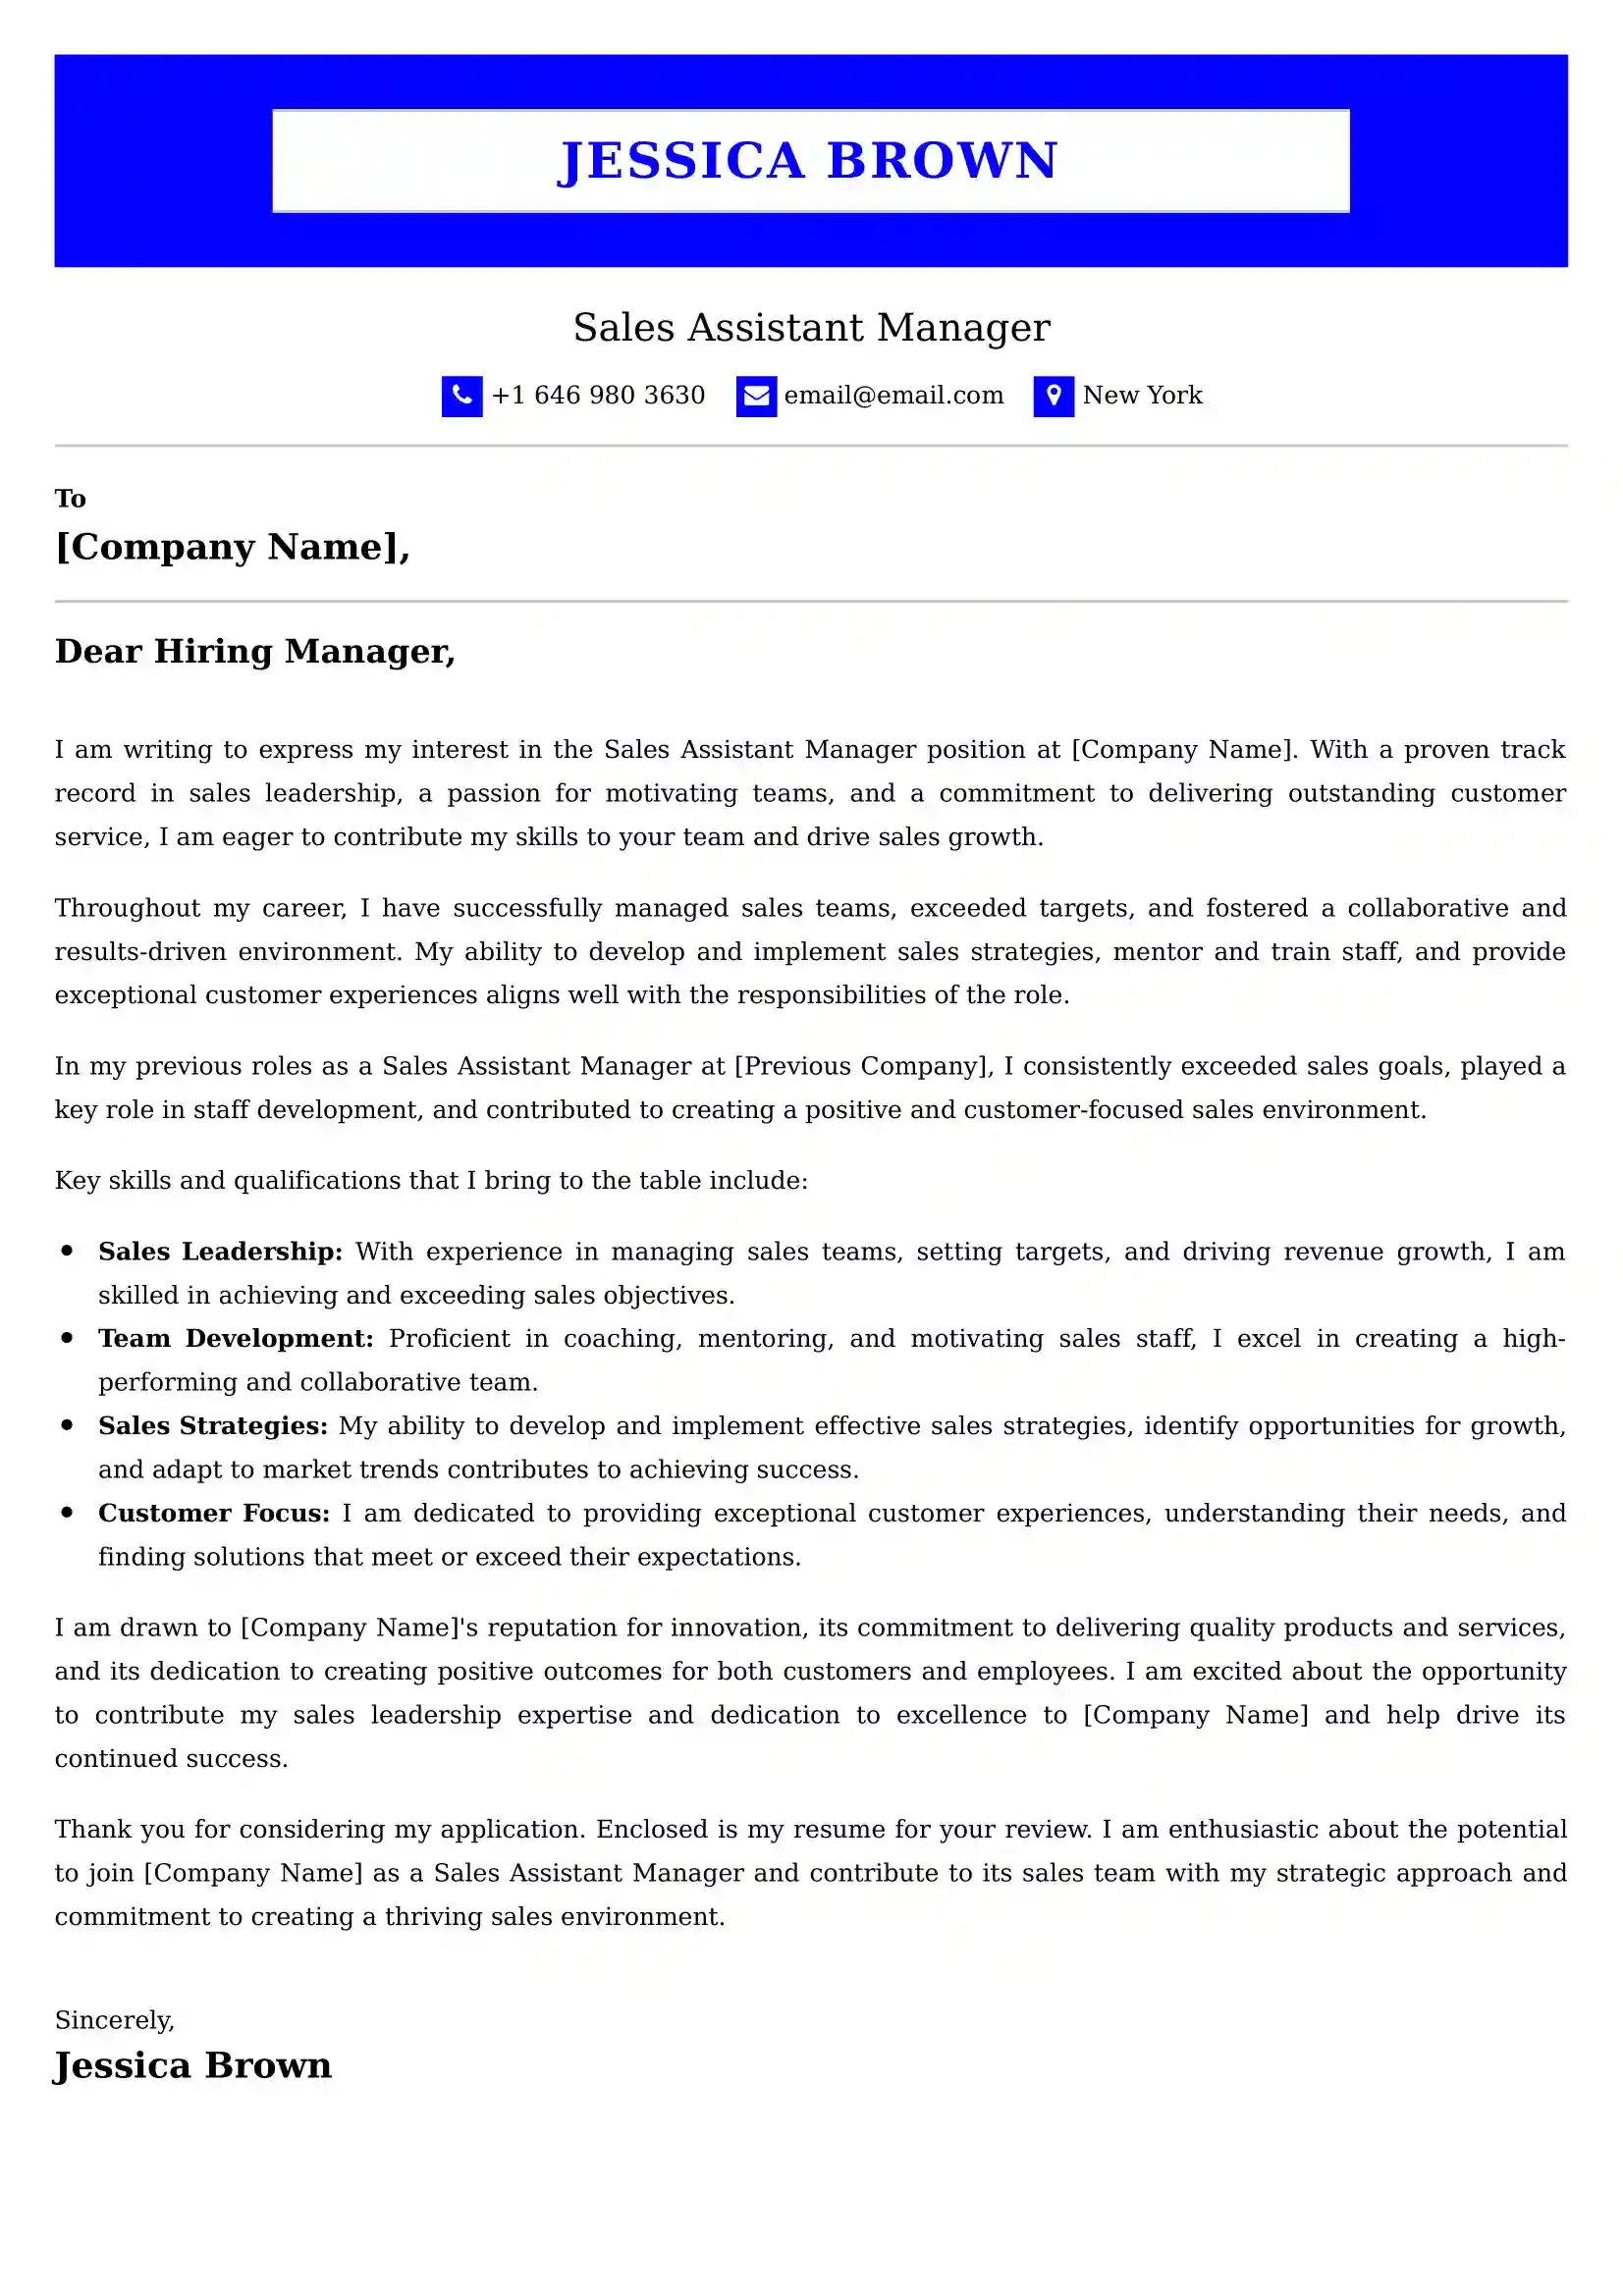 Sales Assistant Manager Cover Letter Examples for UK 